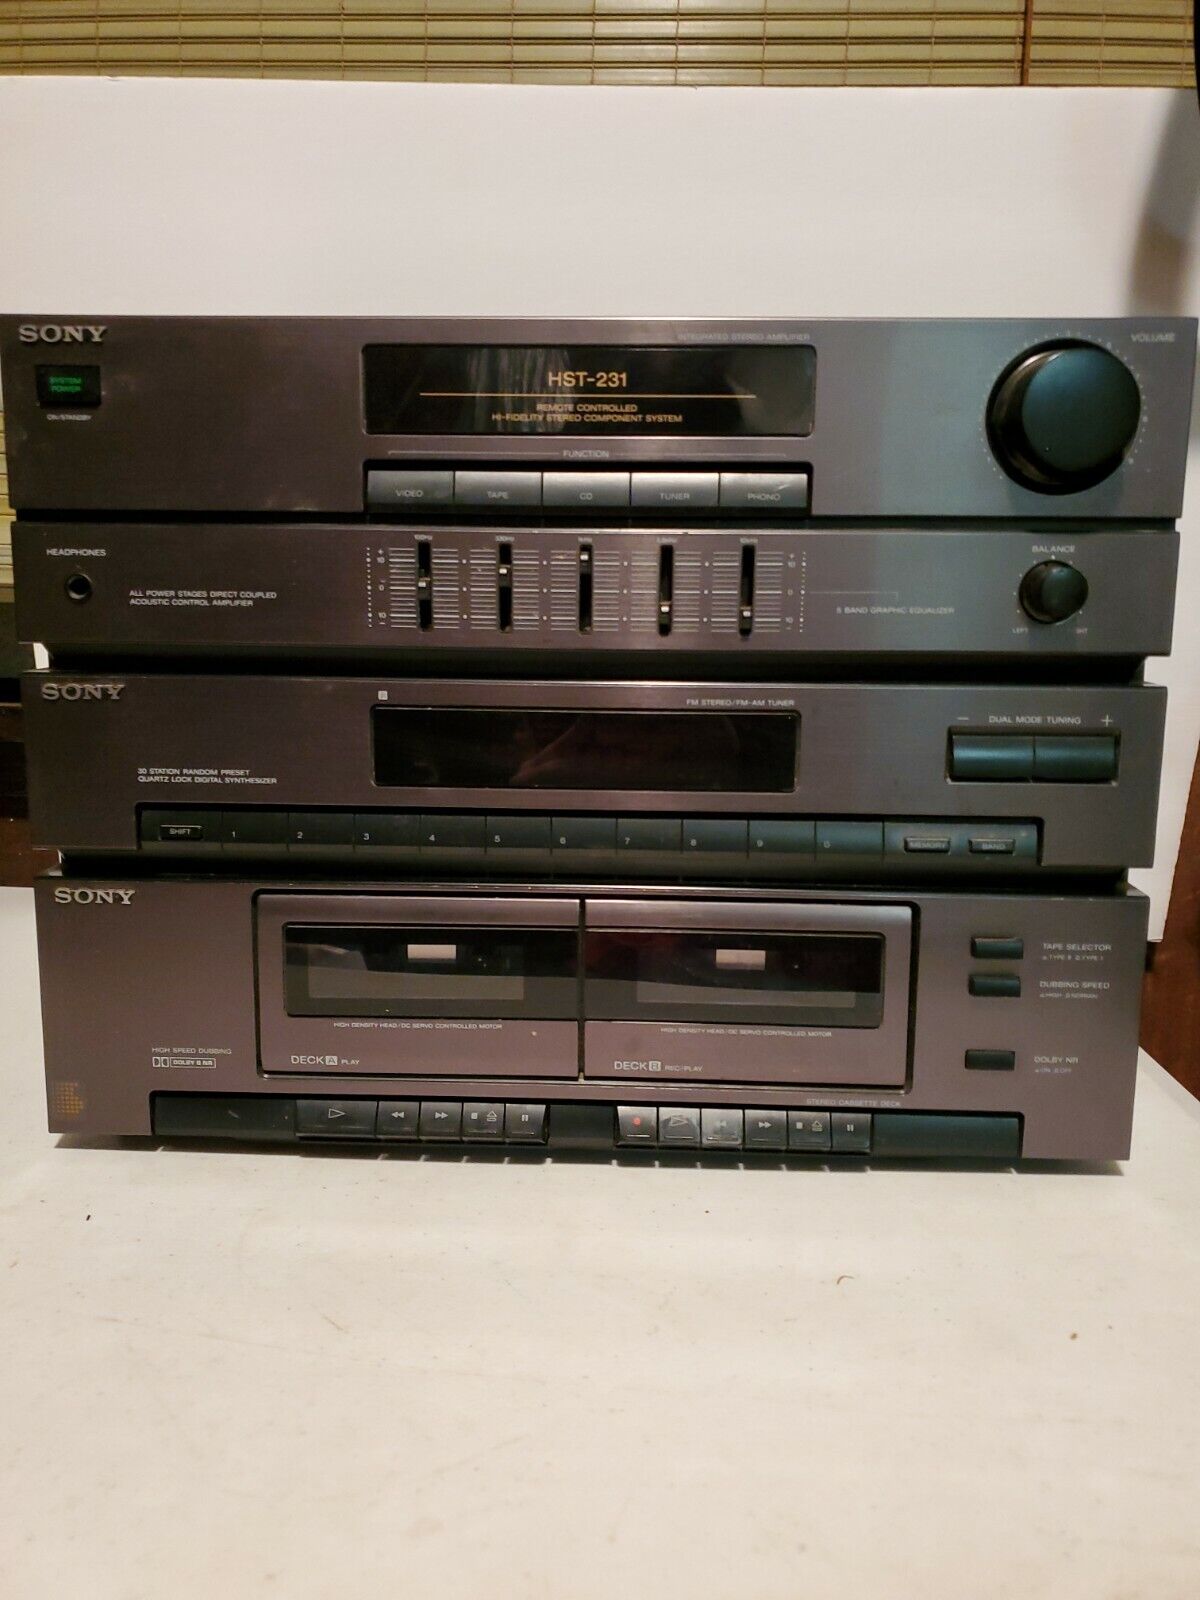 Sony Hst-231 Stereo Component System Tuner Dual Cassette Tape Vintage Rare